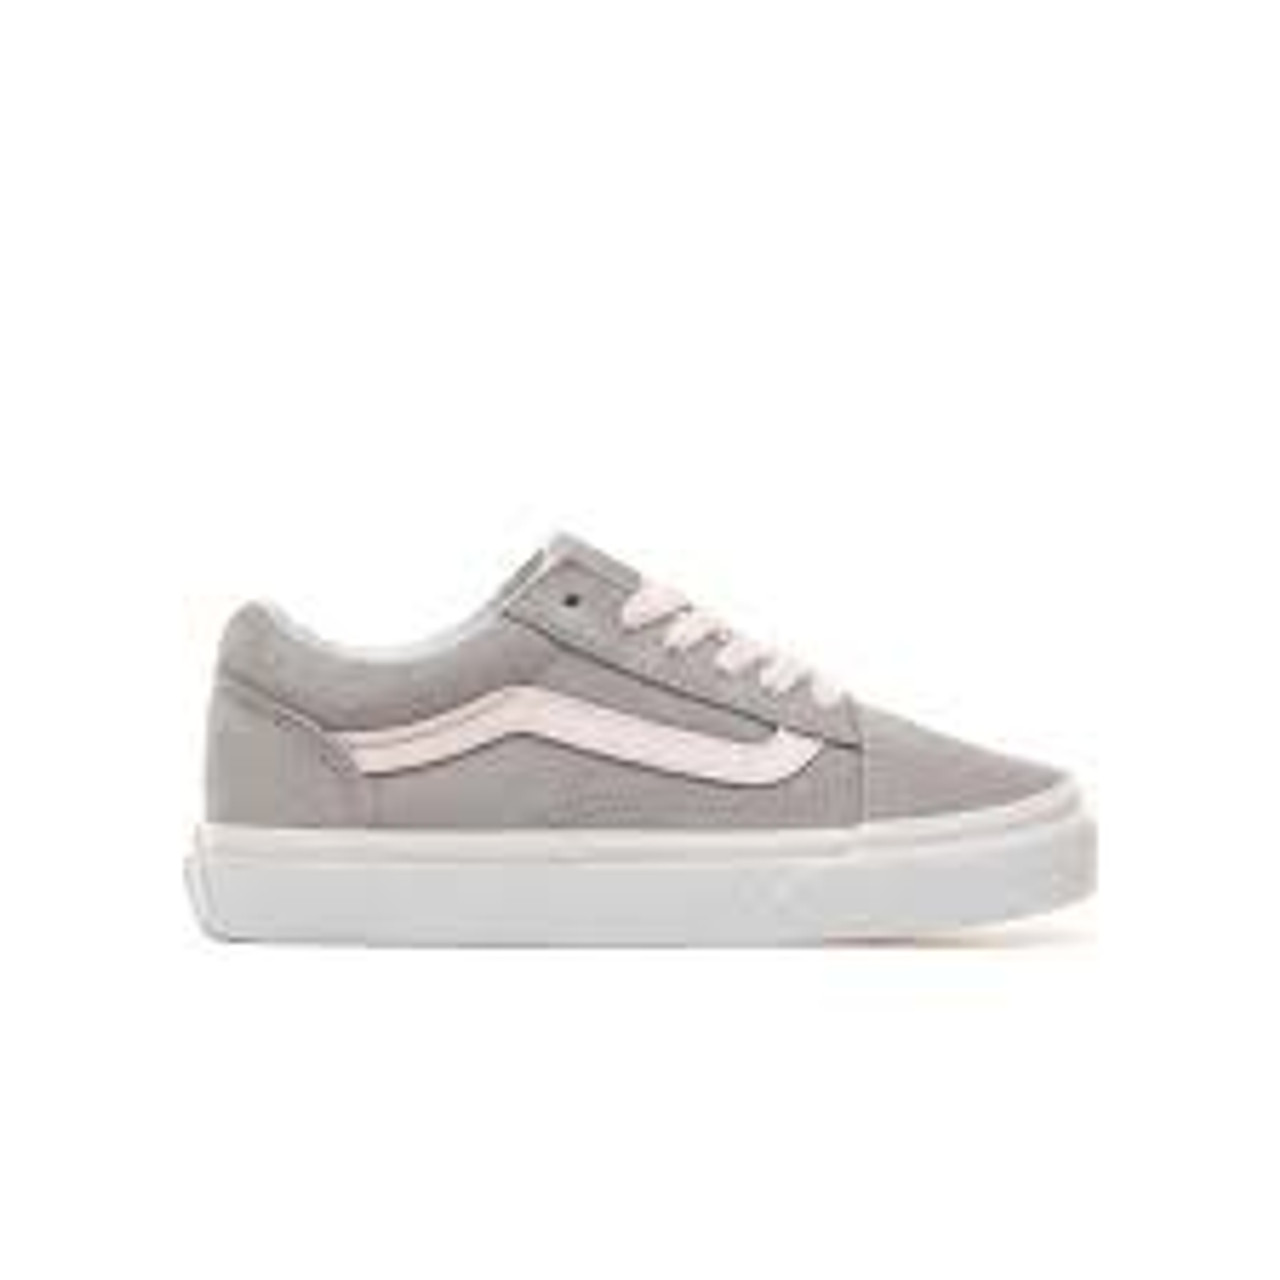 Shoes Dirt Vans Youth - Suede/Alloy/Heavenly - Surf Pink/White - Skool and Old